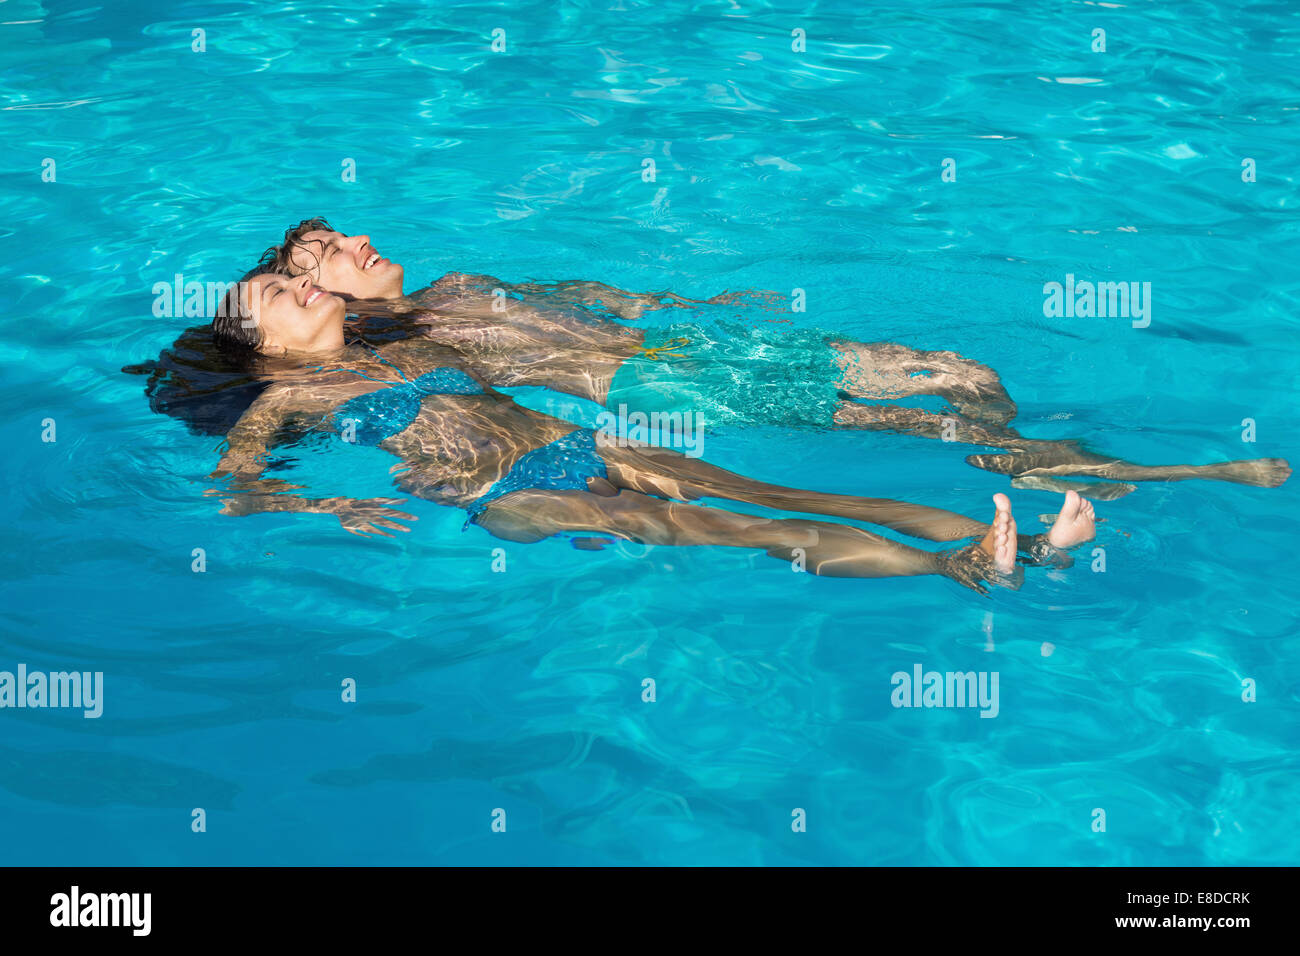 Ambiance jeune couple in swimming pool Banque D'Images